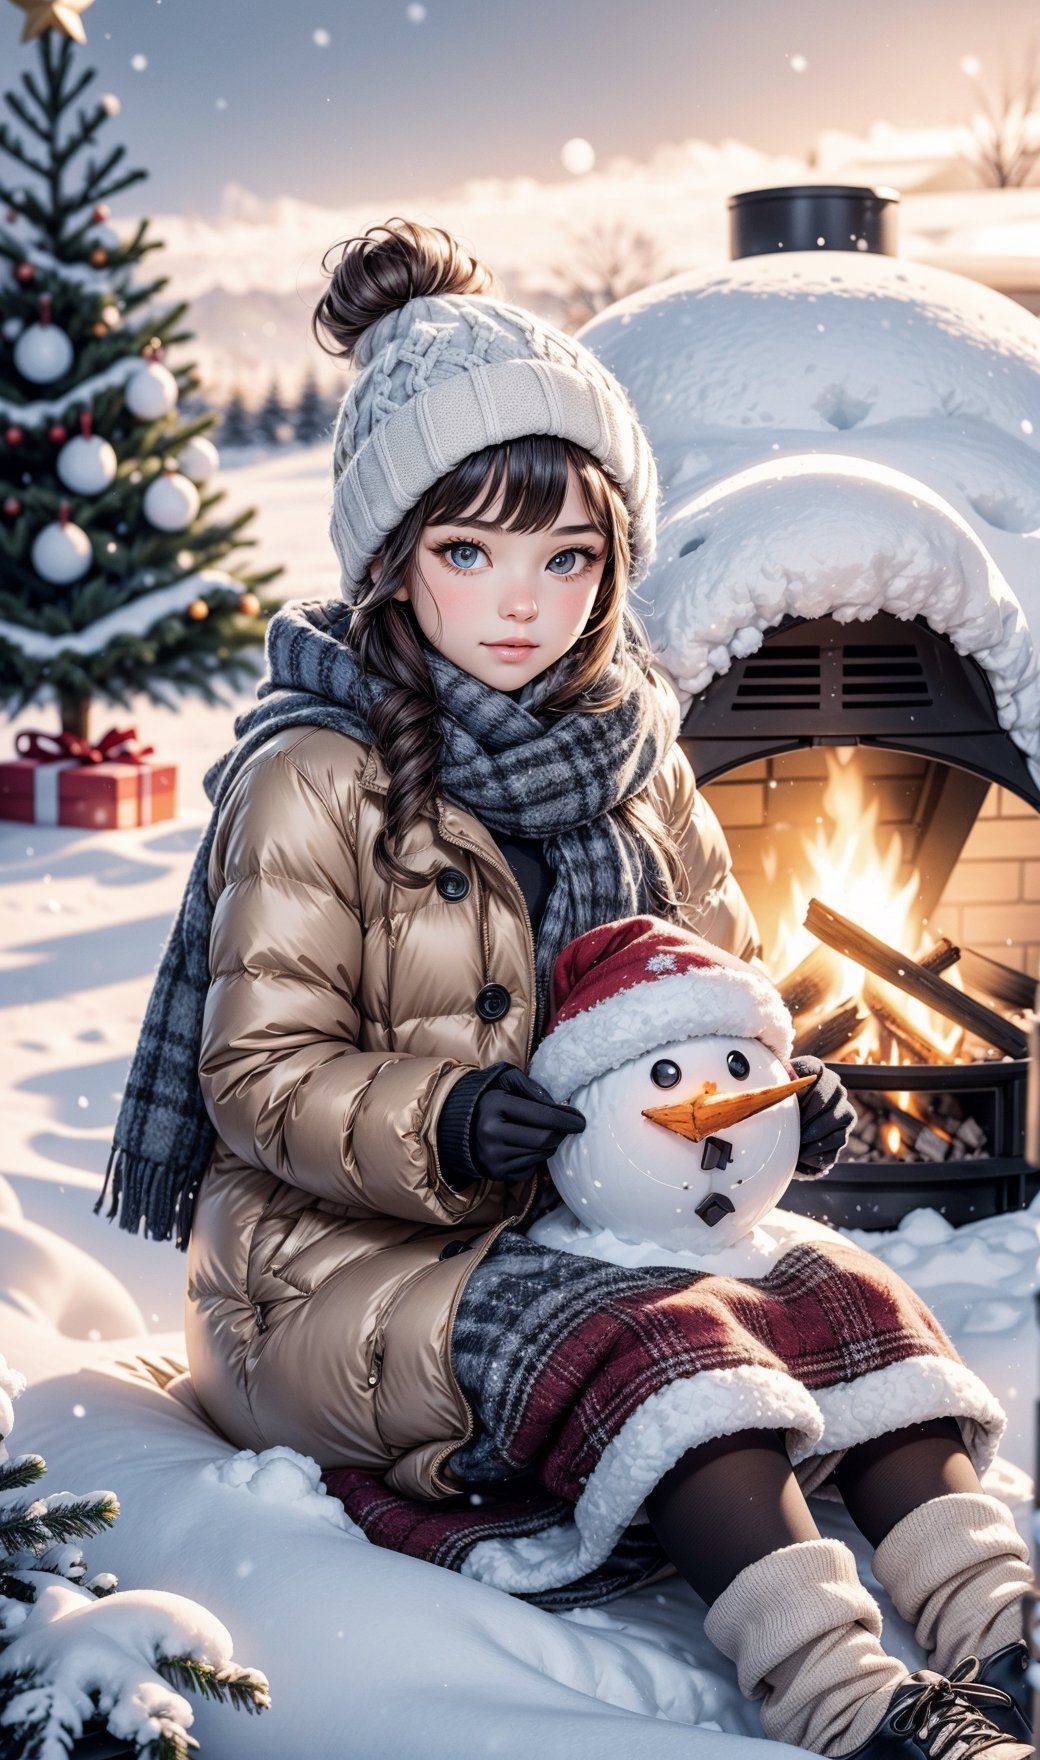 1 girl, snow, winter outfit, bonfire, sitting, tent, christmas tree, Christmas theme, cold, snowman, sunset, illustration,